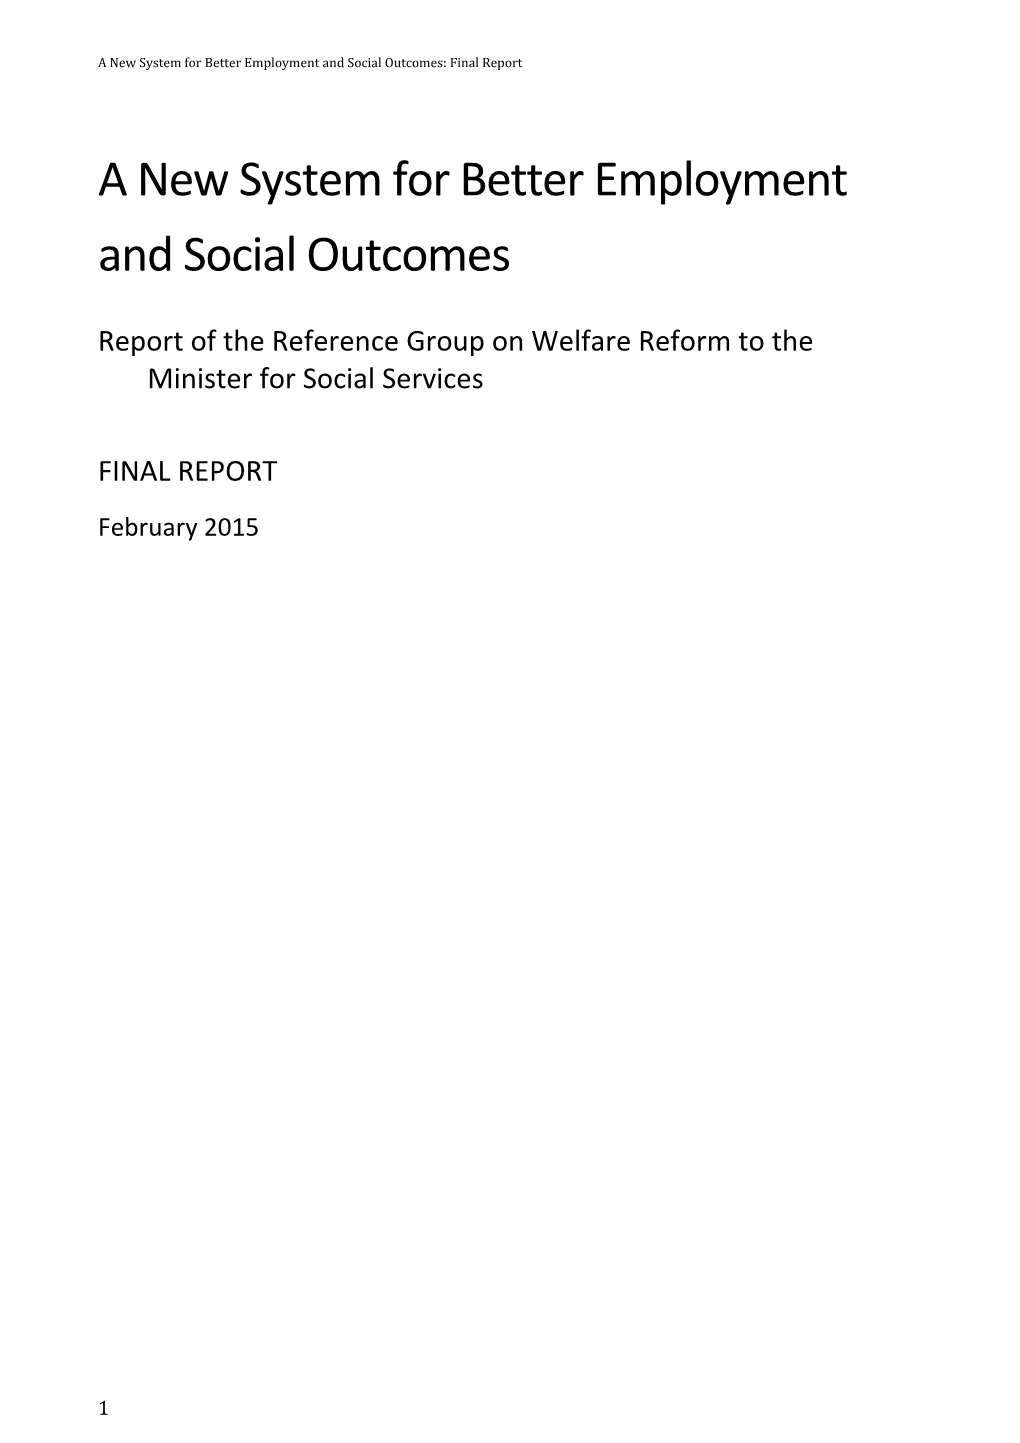 A New System for Better Employment and Social Outcomes: Final Report